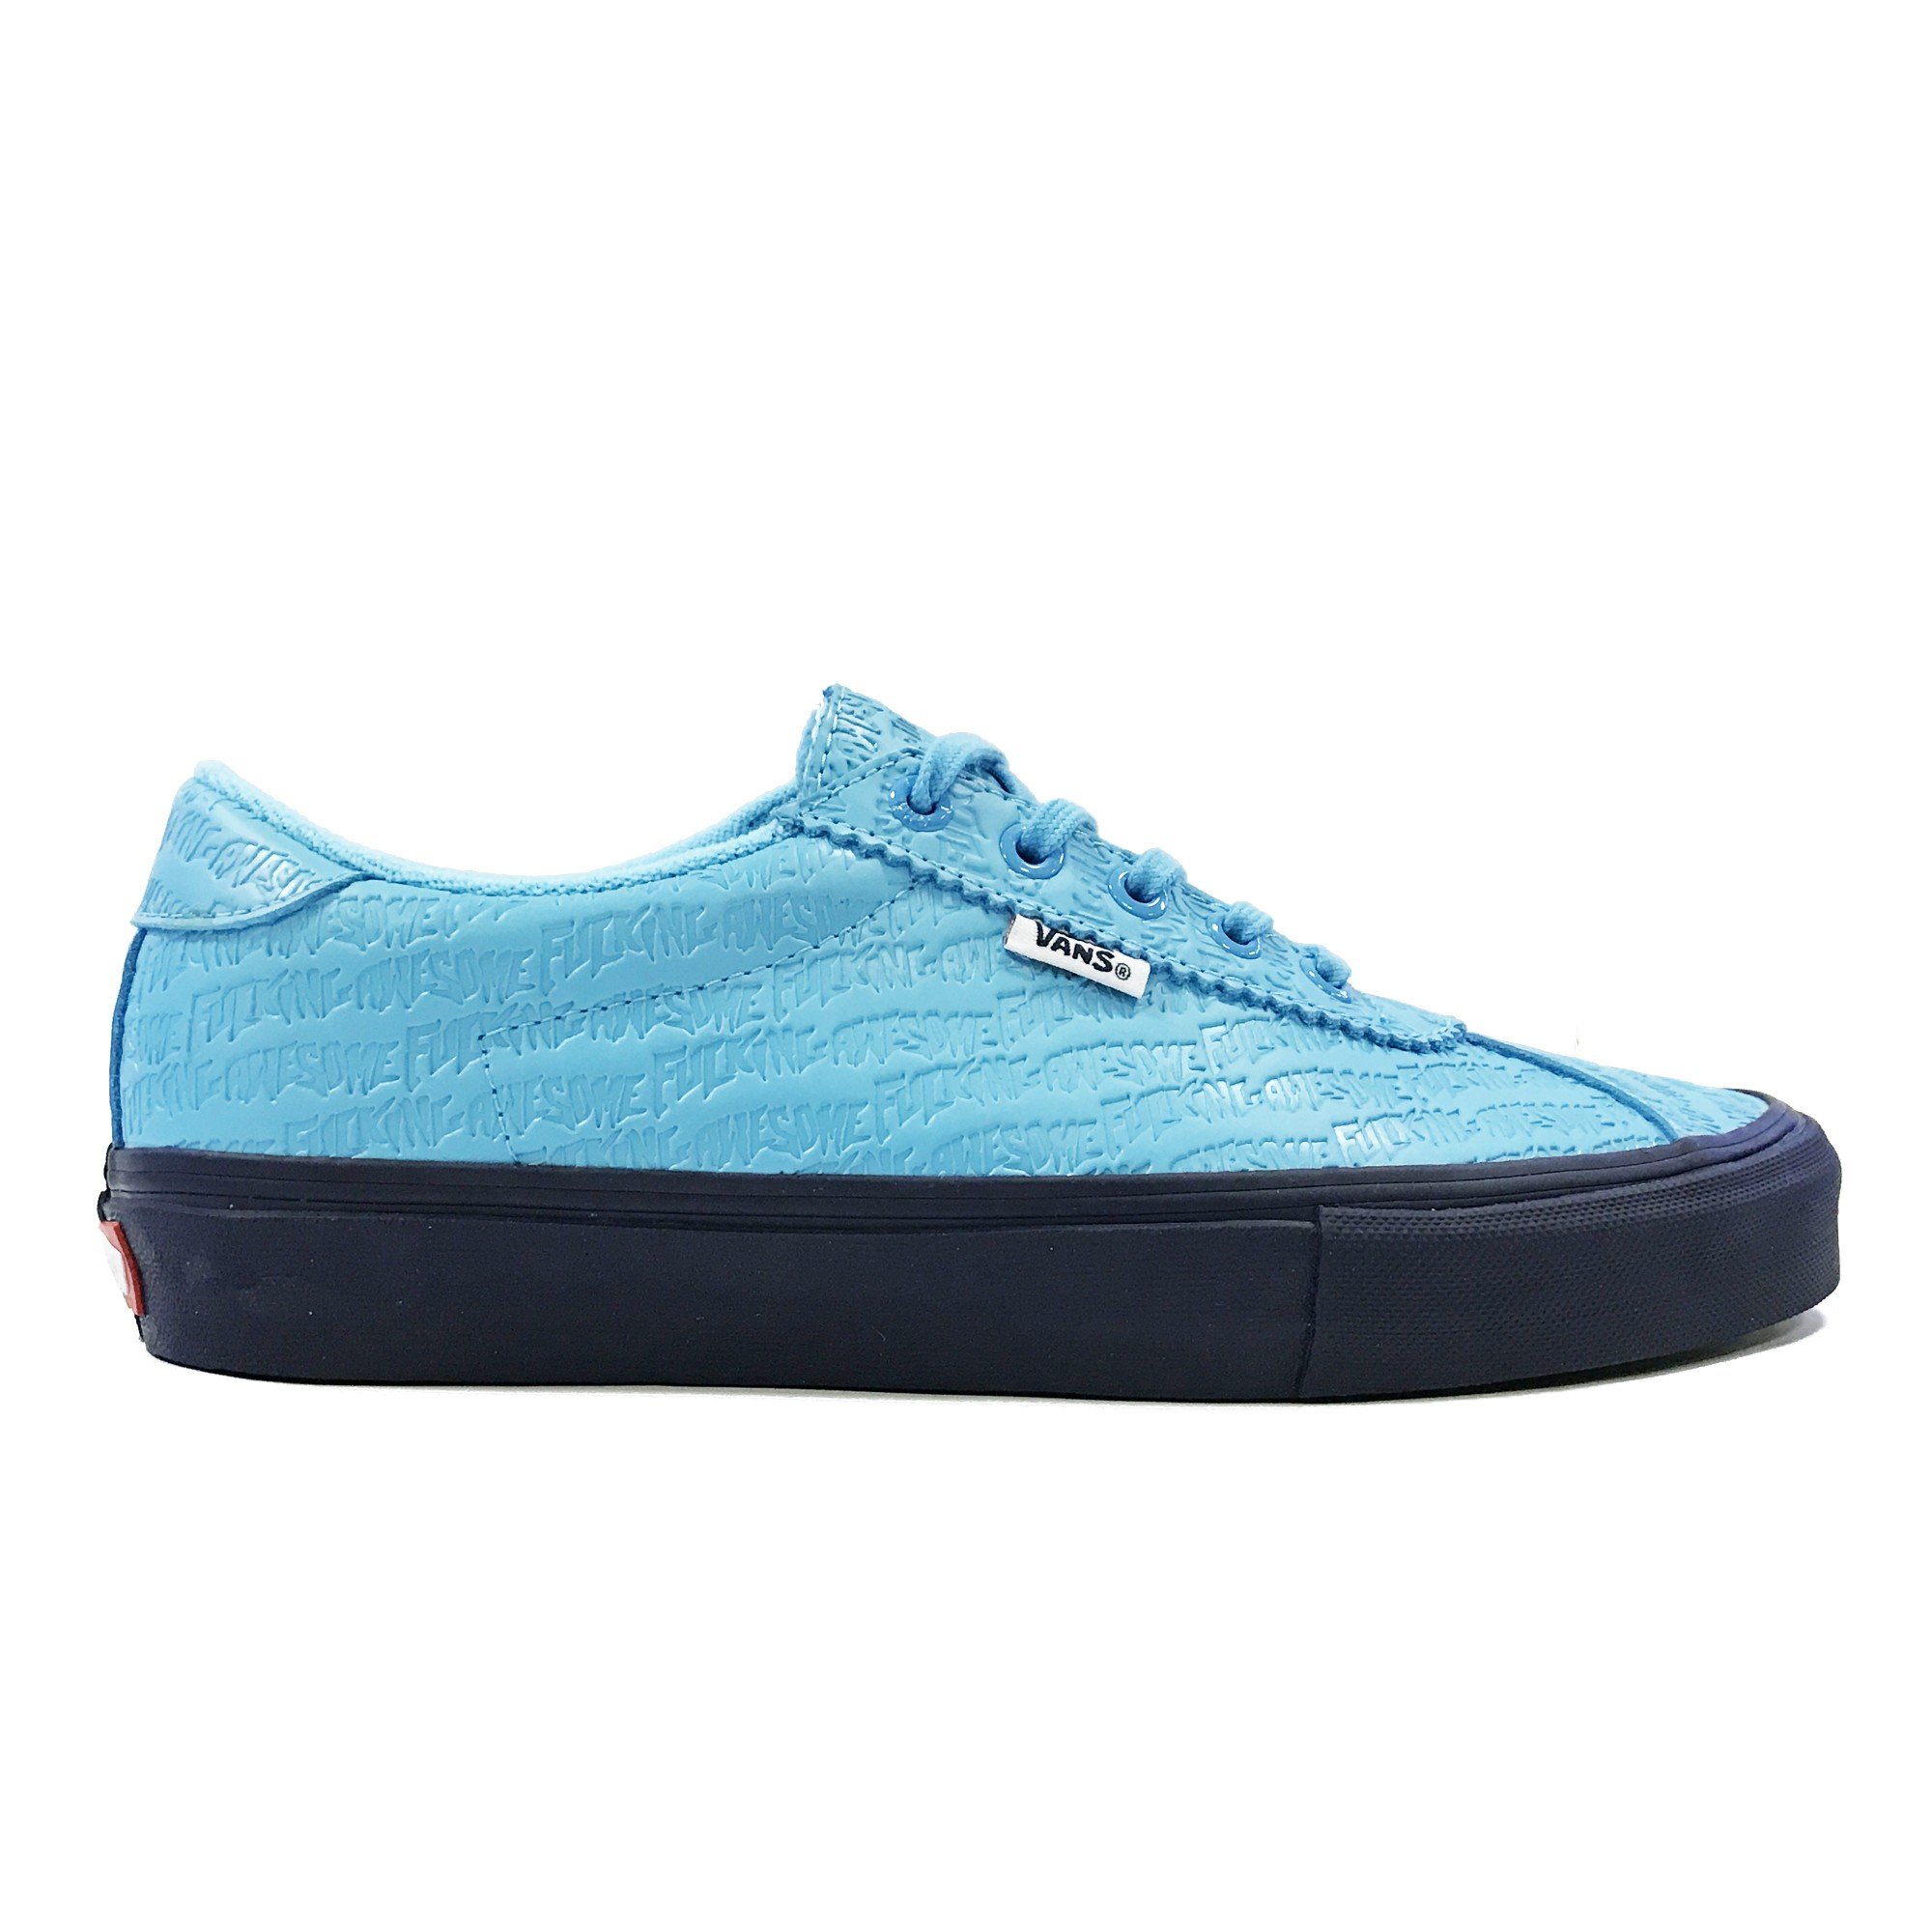 afsnit organisere afhængige Vans x Fucking Awesome Epoch '94 Pro (Bright Blue) - Consortium.